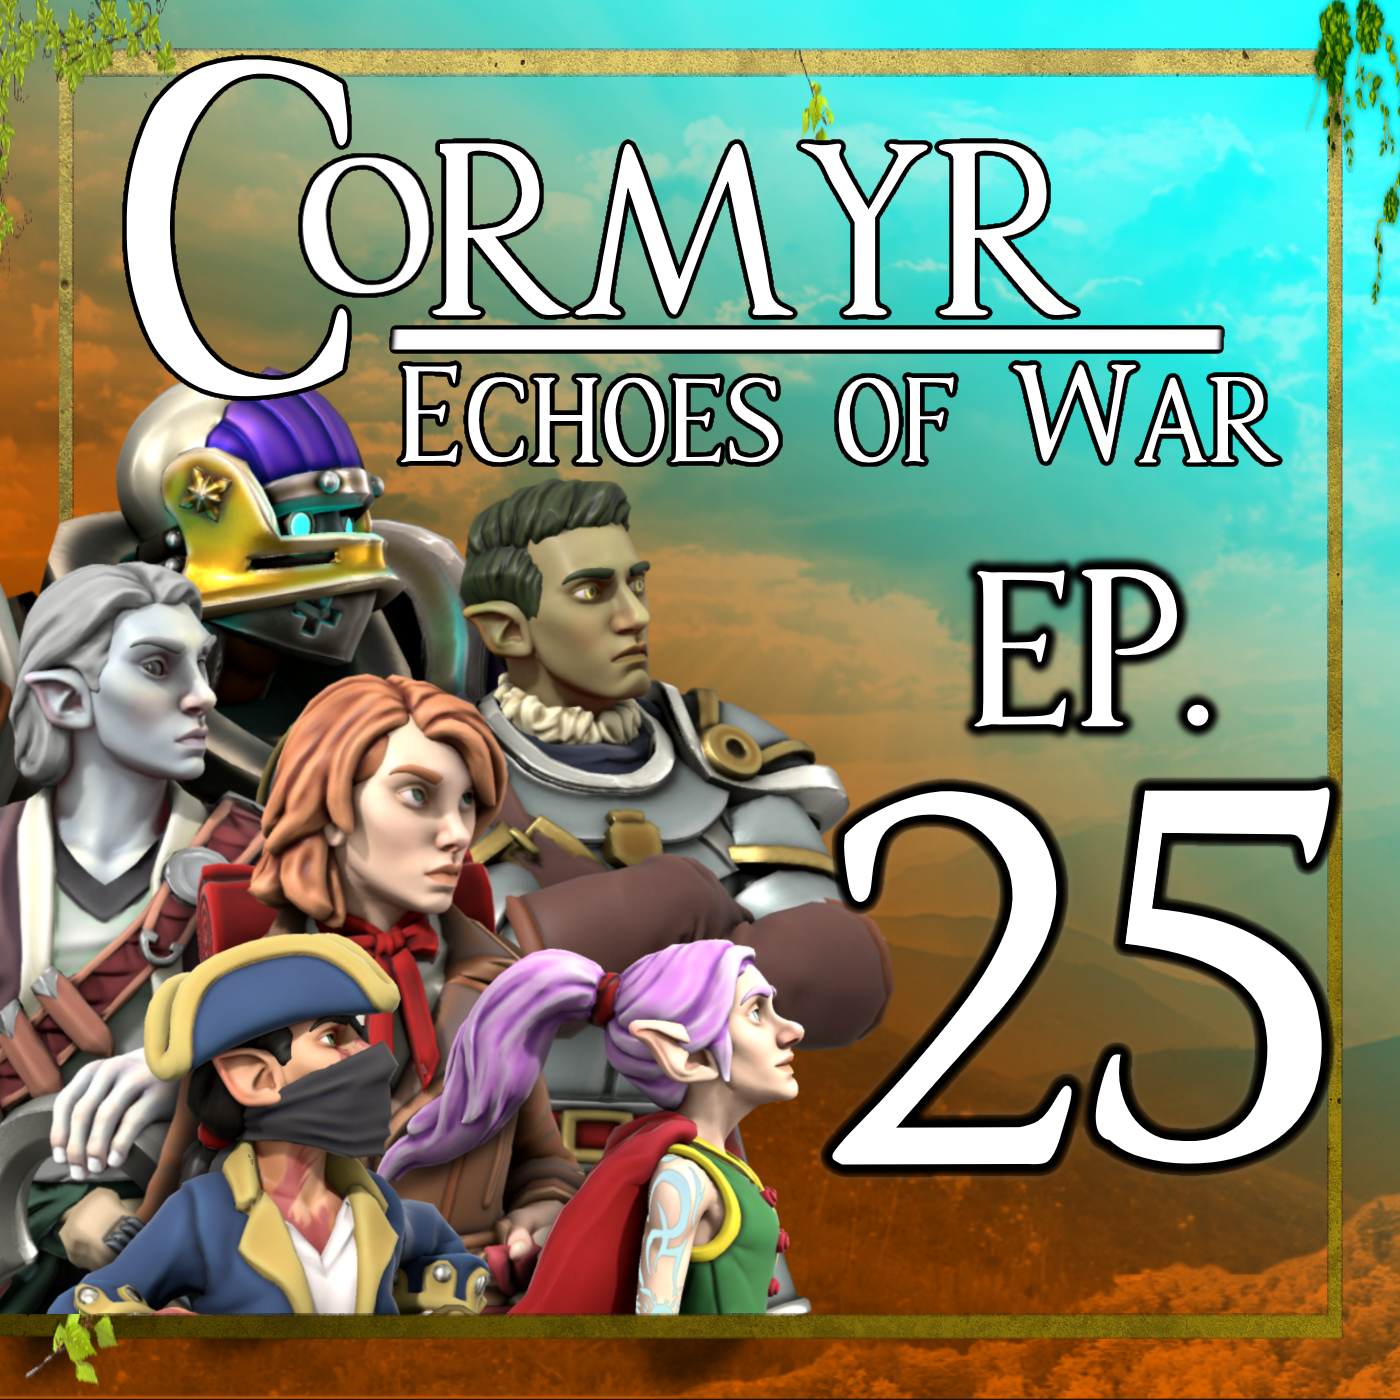 Cormyr: Echoes of War - Ep. 25 - A Pirate's Life For Me